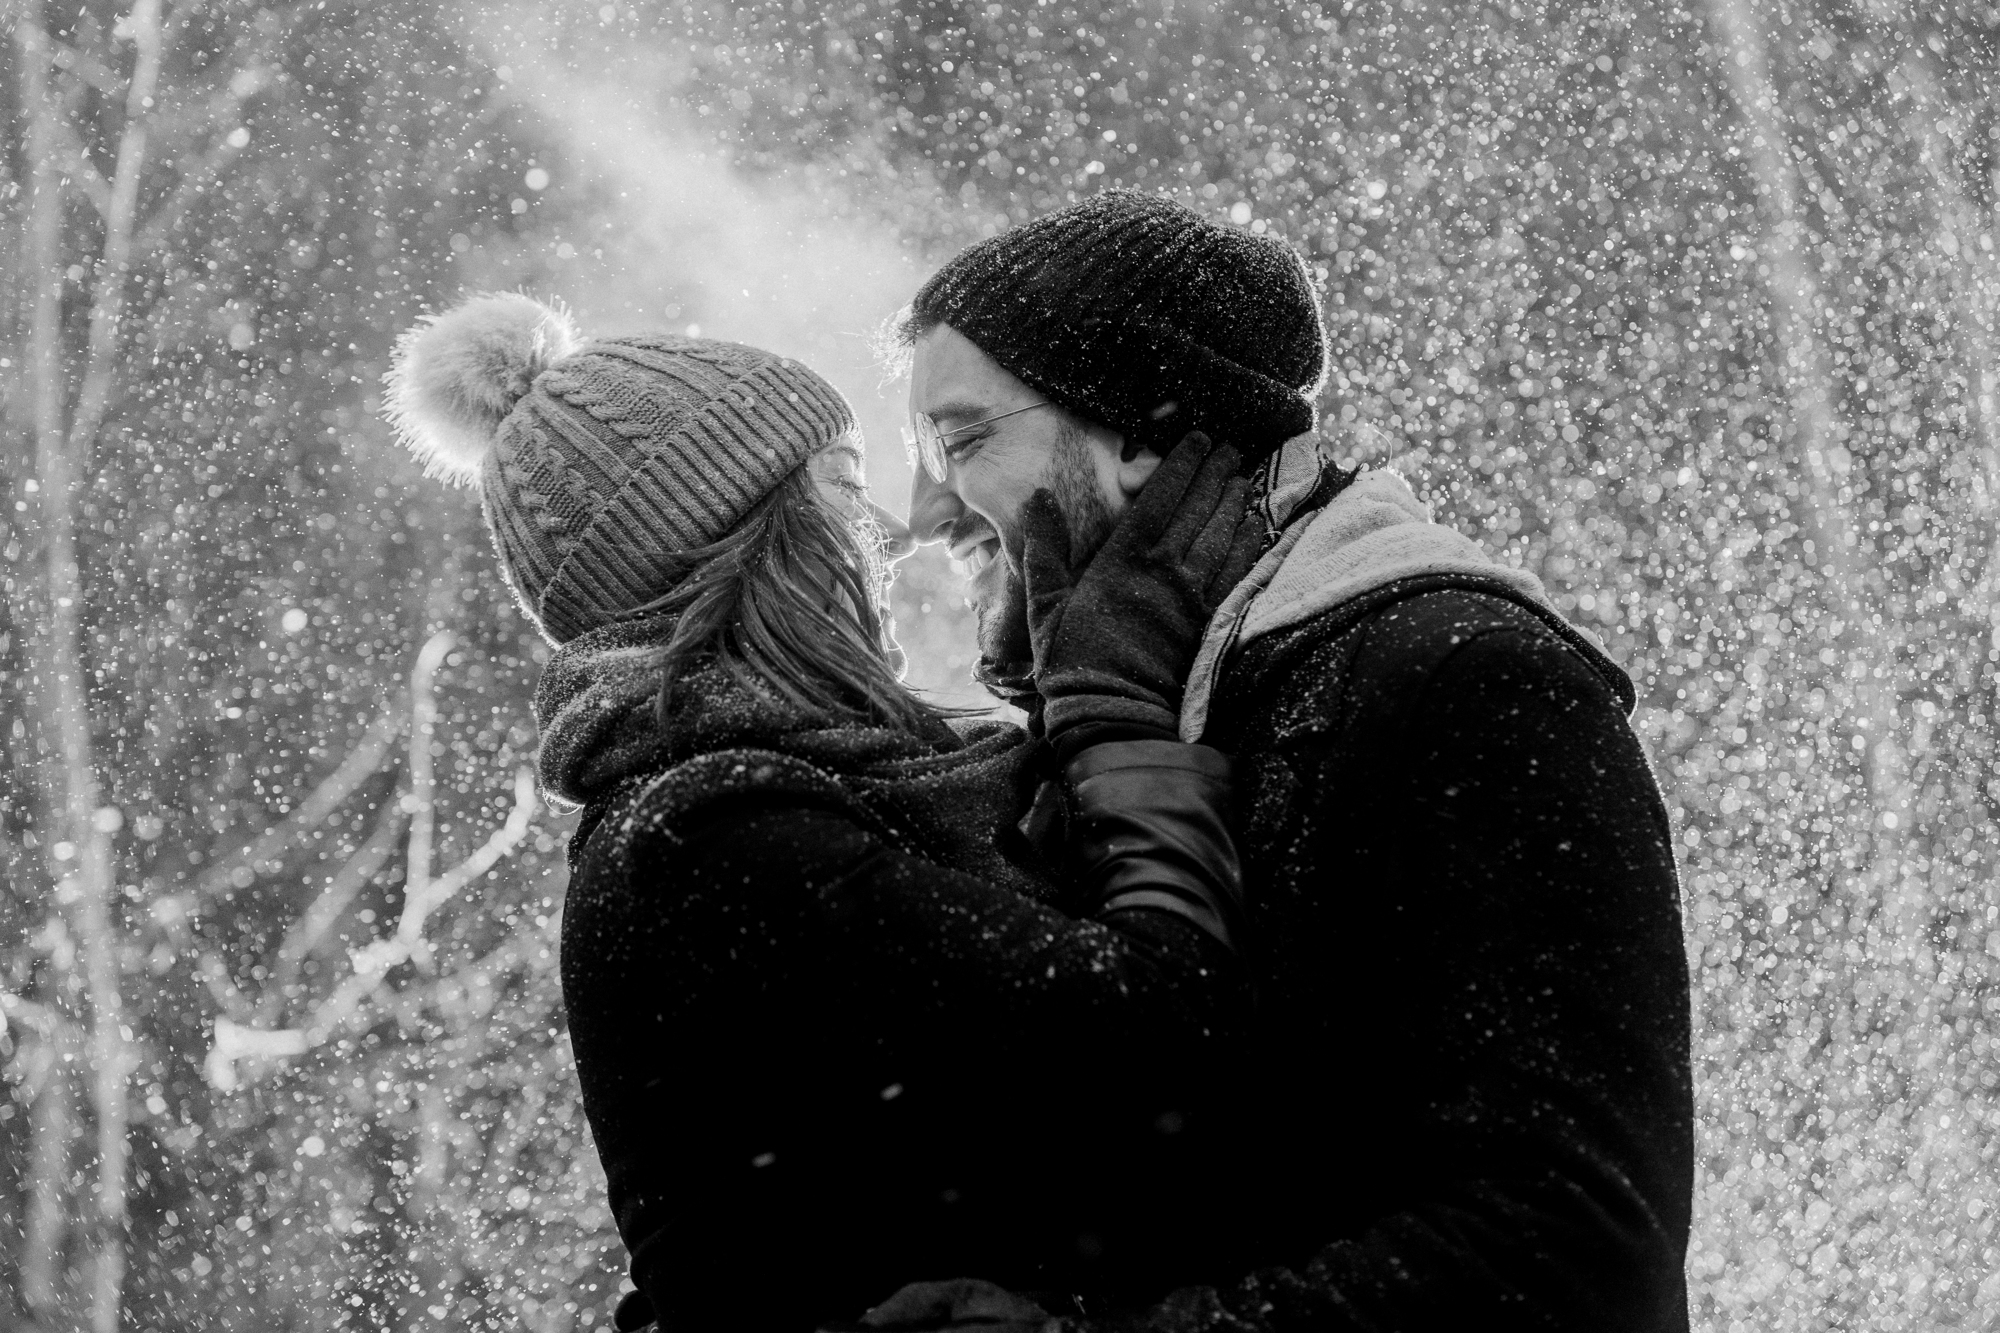 Snowy engagement photos in Dumbo